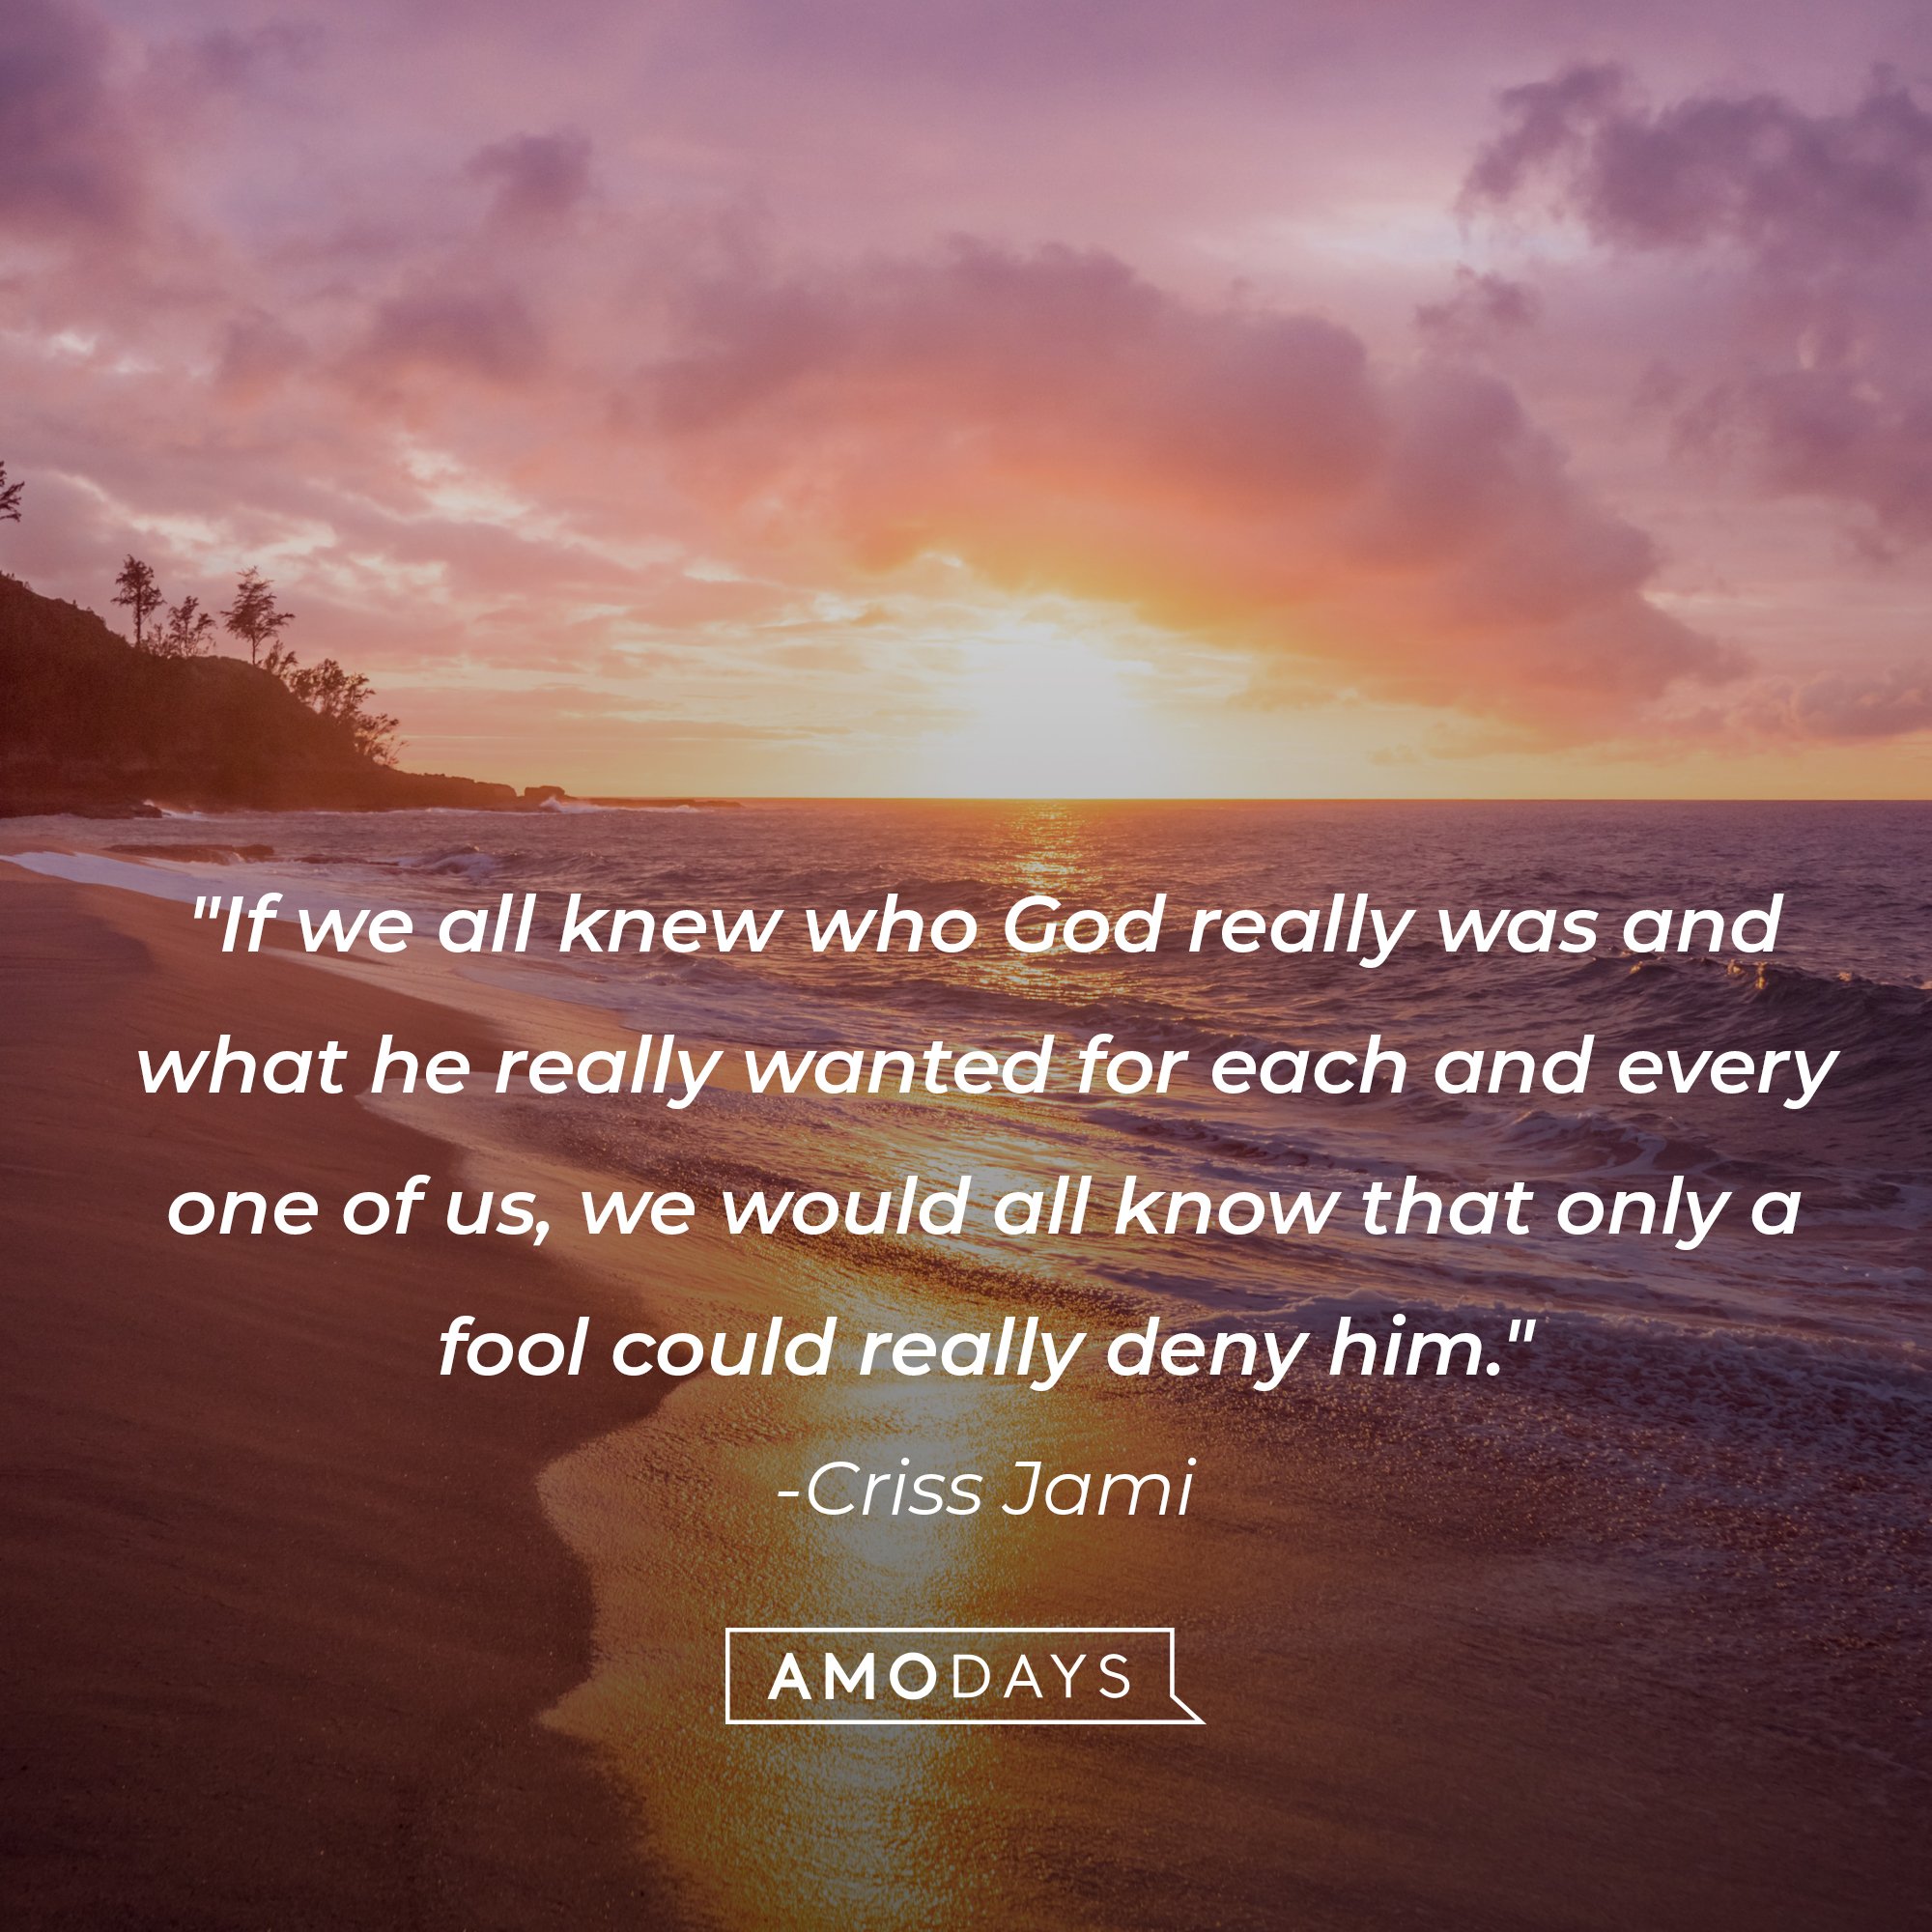 Criss Jami’s quote: "If we all knew who God really was and what he really wanted for each and every one of us, we would all know that only a fool could really deny him.” | Image: AmoDays   